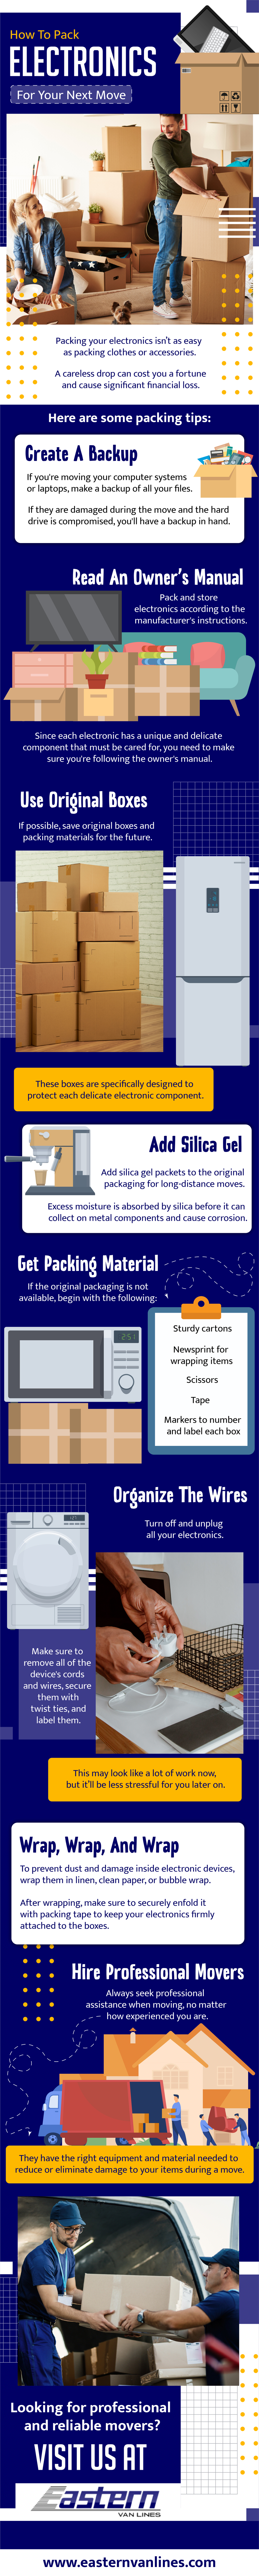 How To Pack Electronics For Your Next Move Infograph